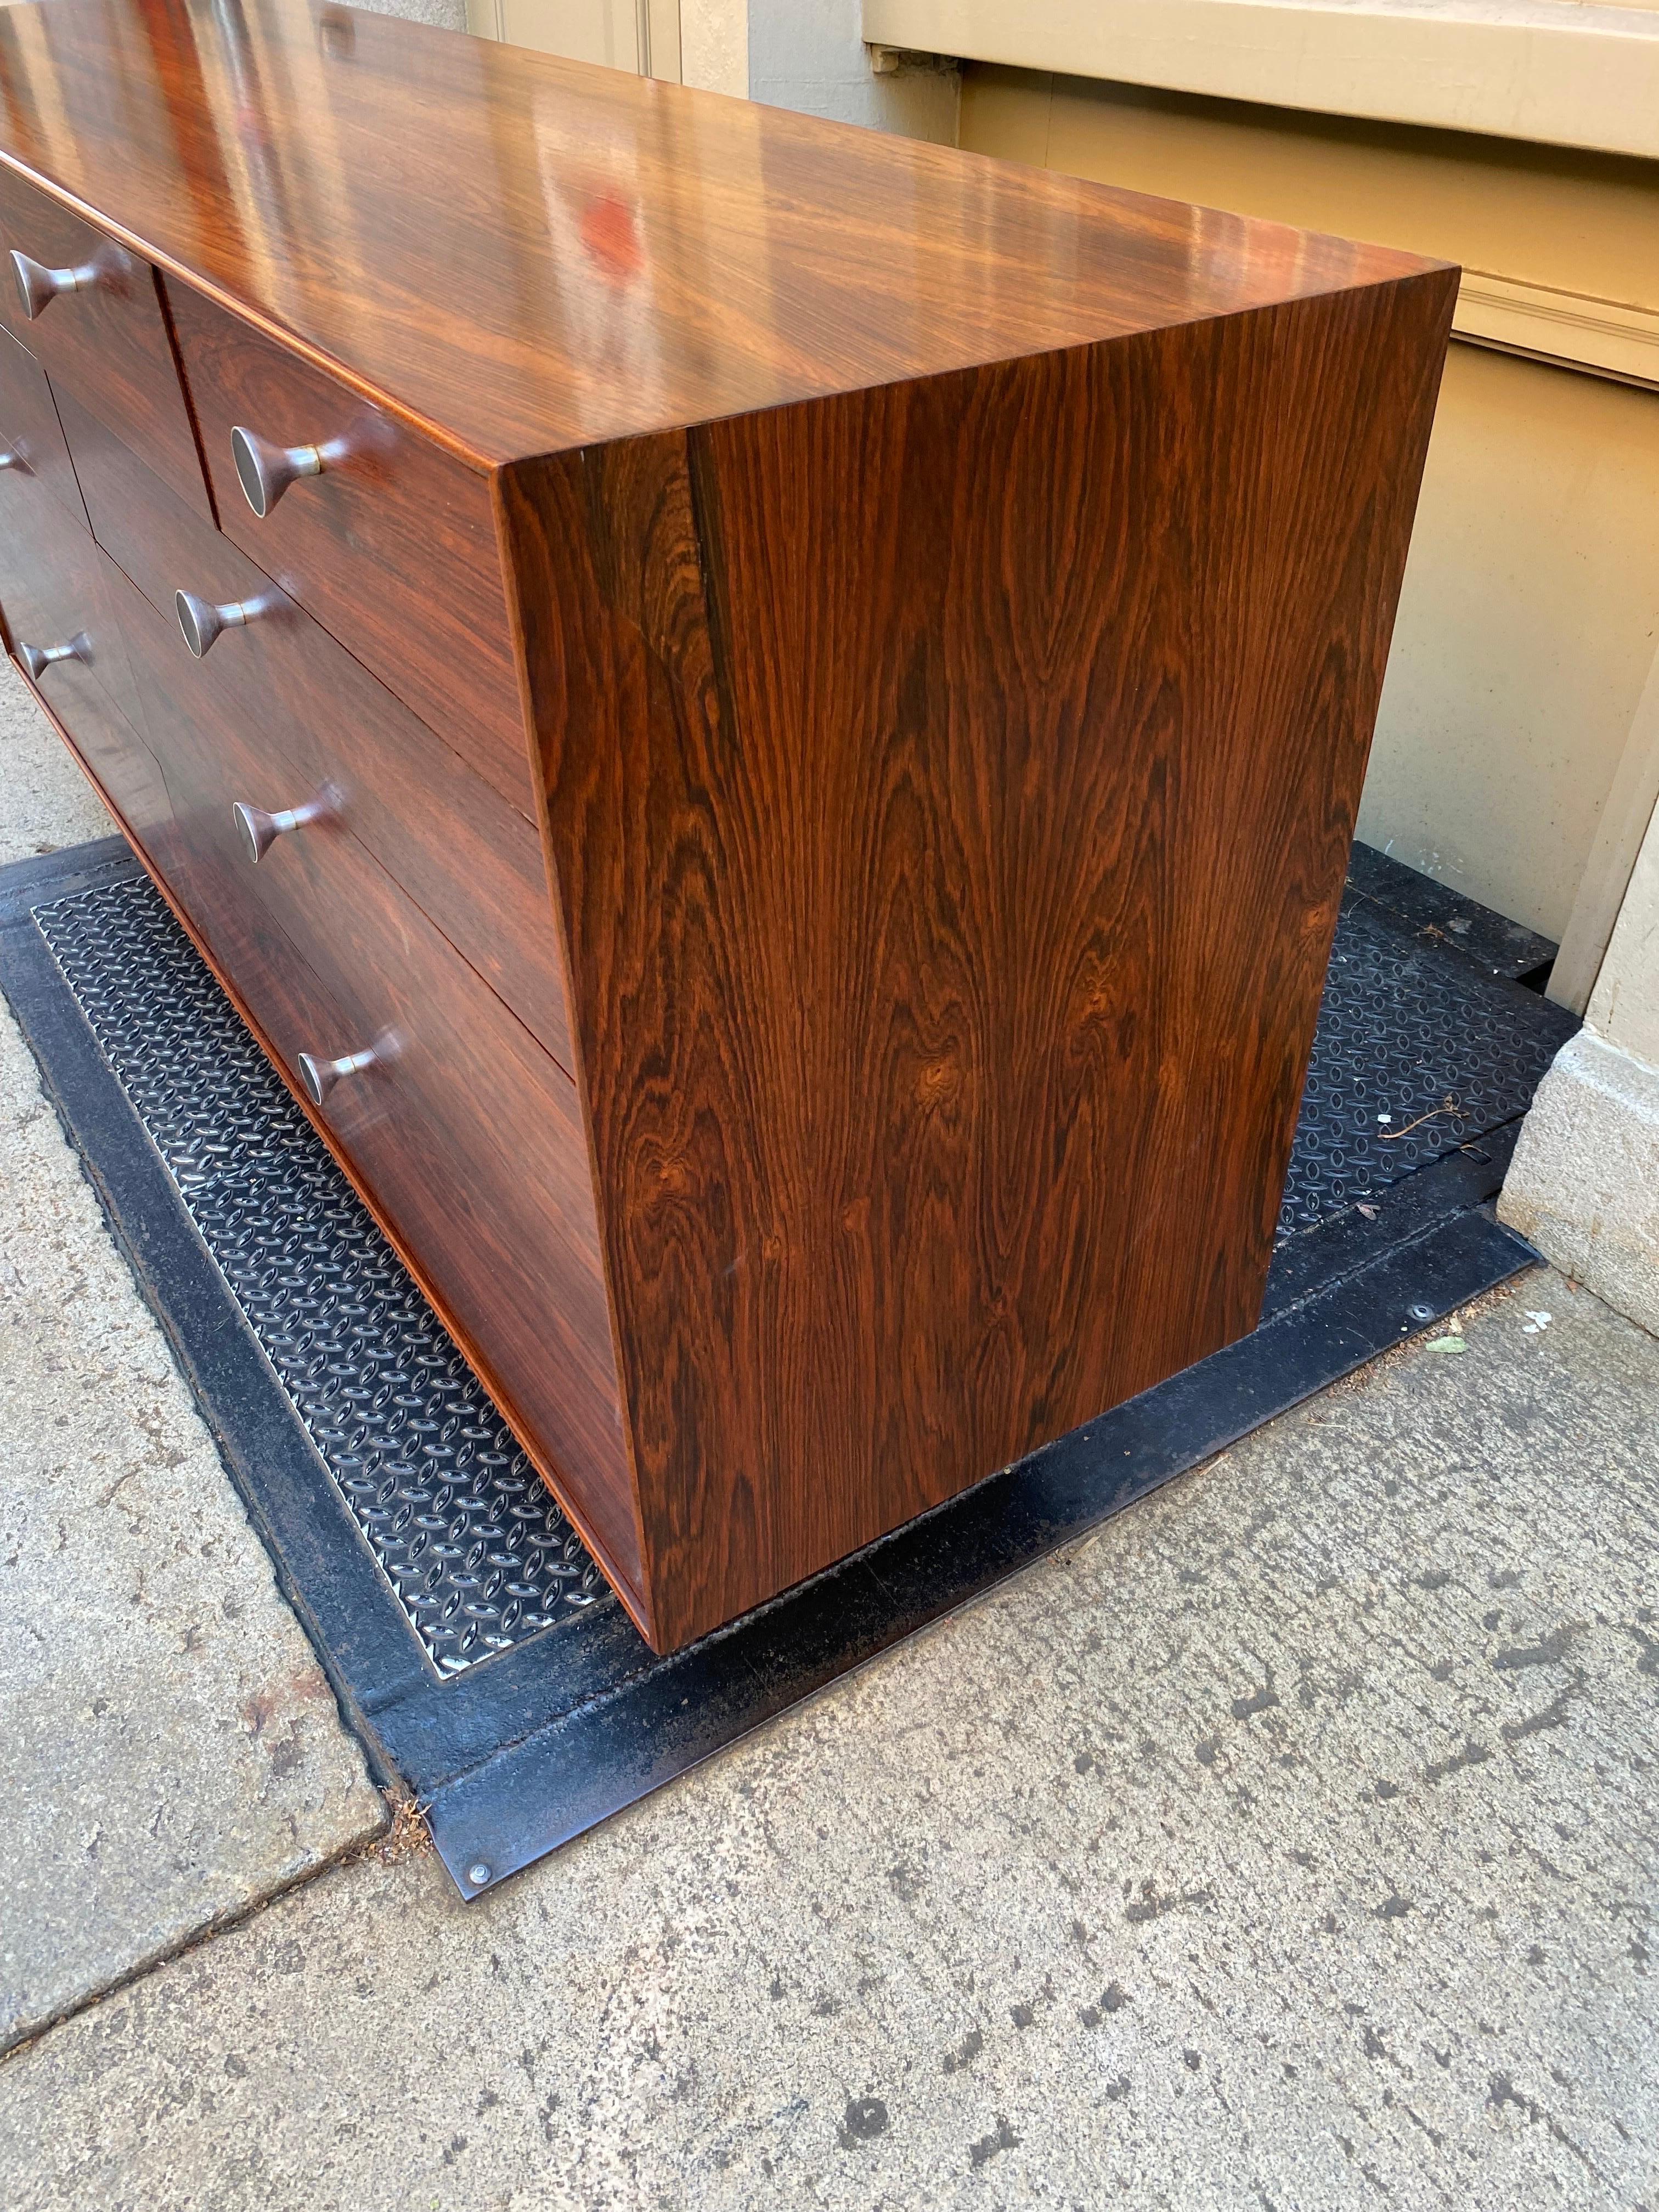 George Nelson rosewood thin-edge 10 drawer dresser. Beautiful piece with tons of storage! Aluminum Feet and knobs with black inner circle. Dresser includes original hang tag! Label inside drawer. Thin-Edge pieces are probably one of his most sought